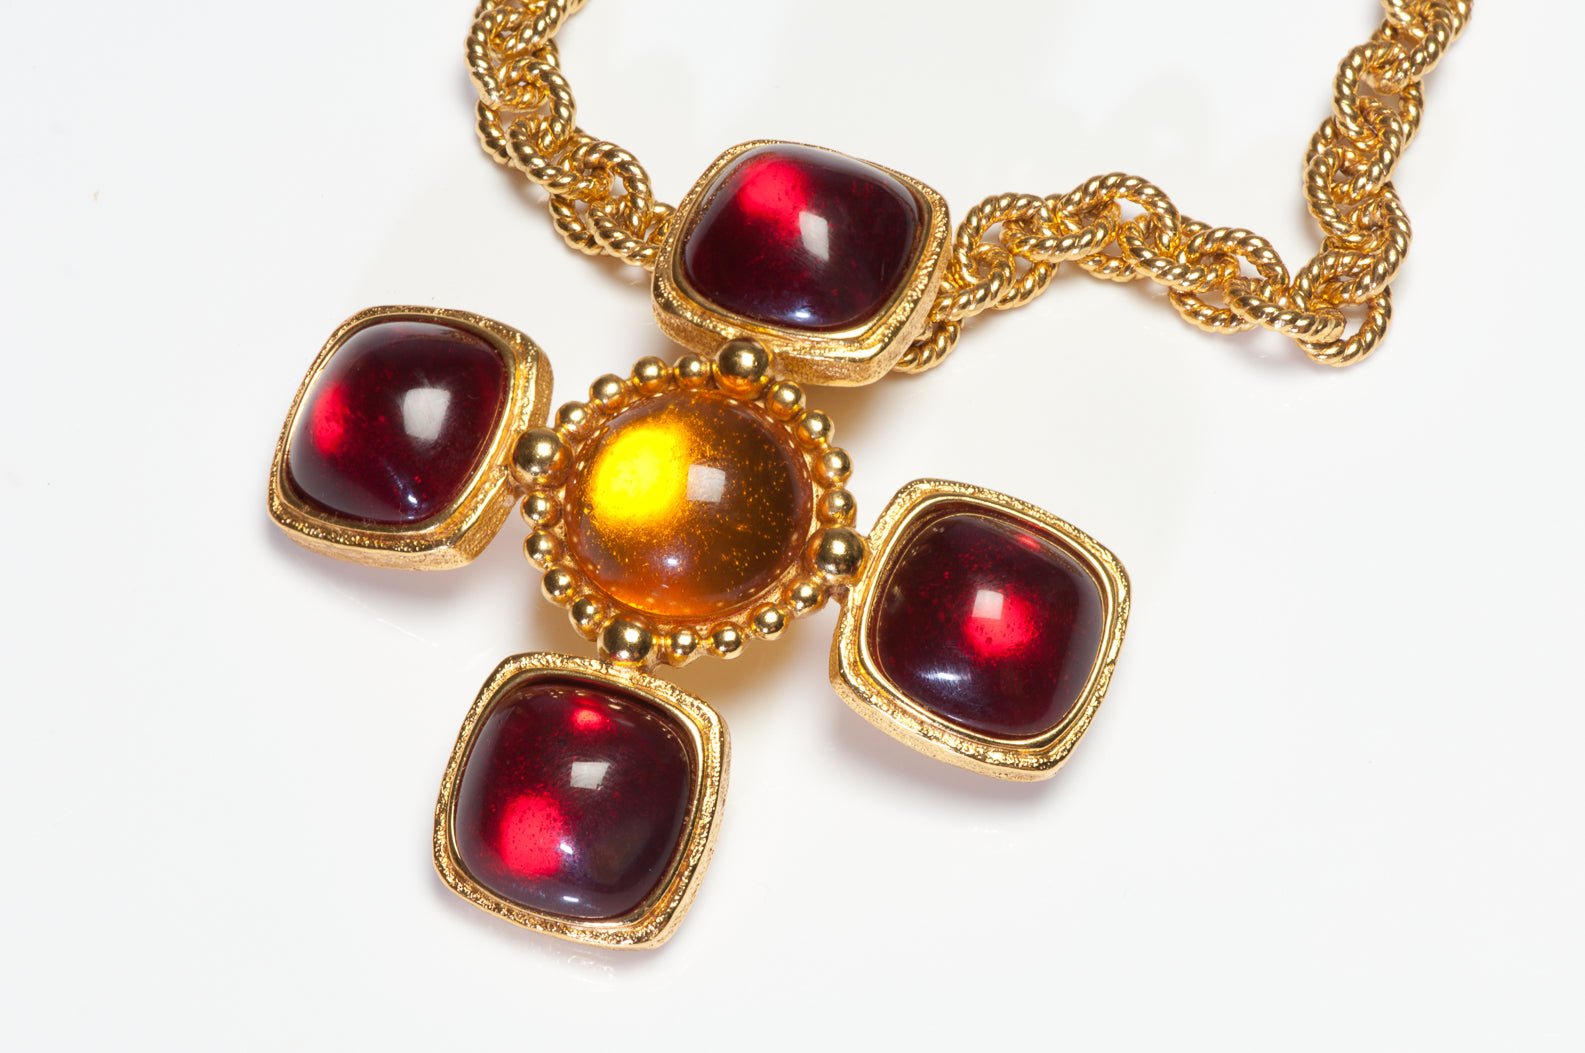 Vintage Carlisle Red Yellow Cabochon Lucite Cross Brooch Pendant Chain Necklace